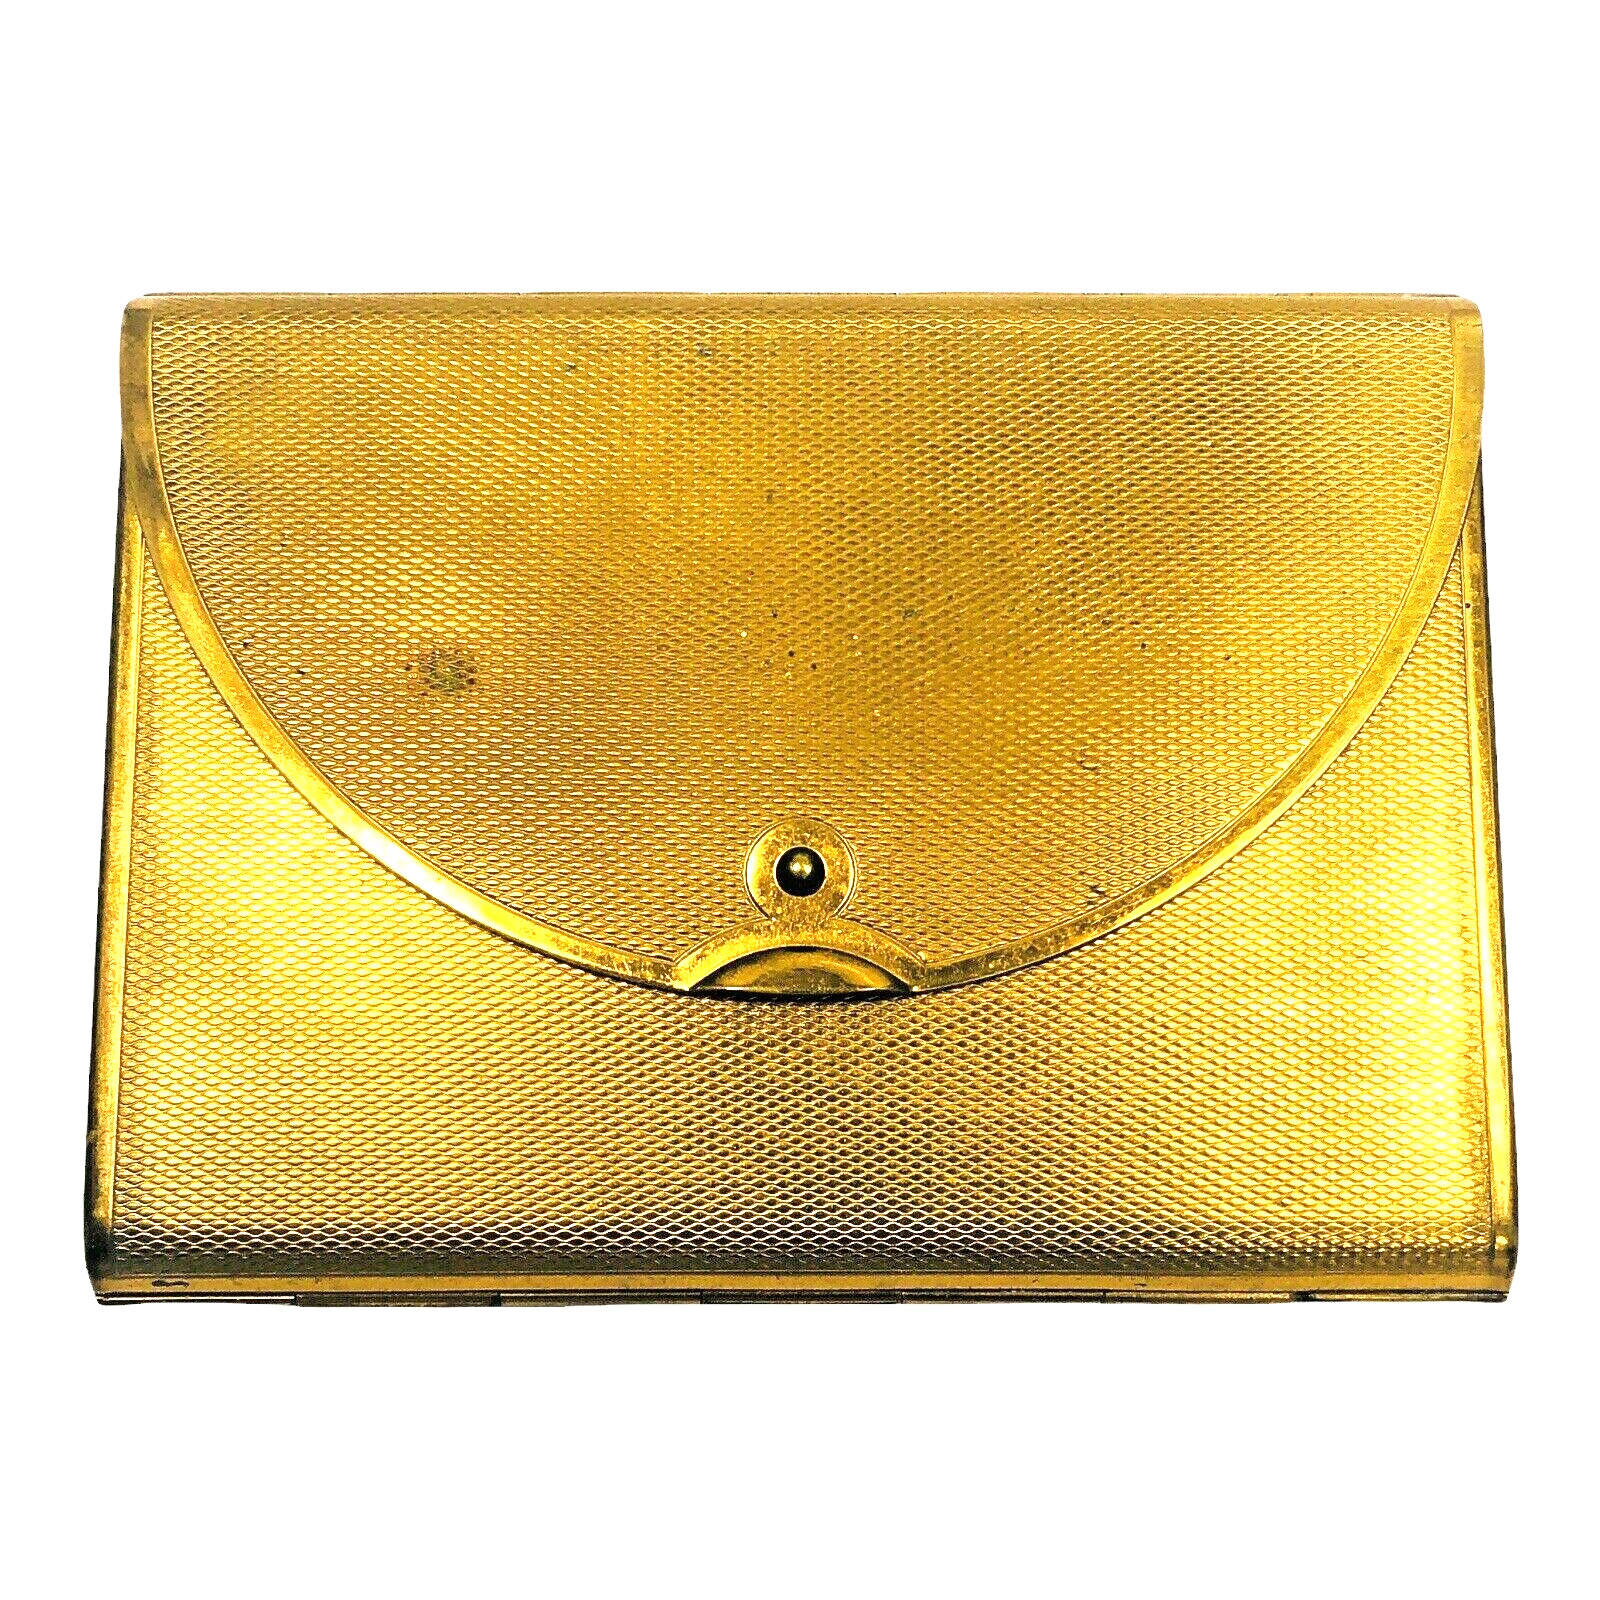 Coty GOLDEN ENVELOPE Vintage Powder Brass Compact with Mirror Trifold #119